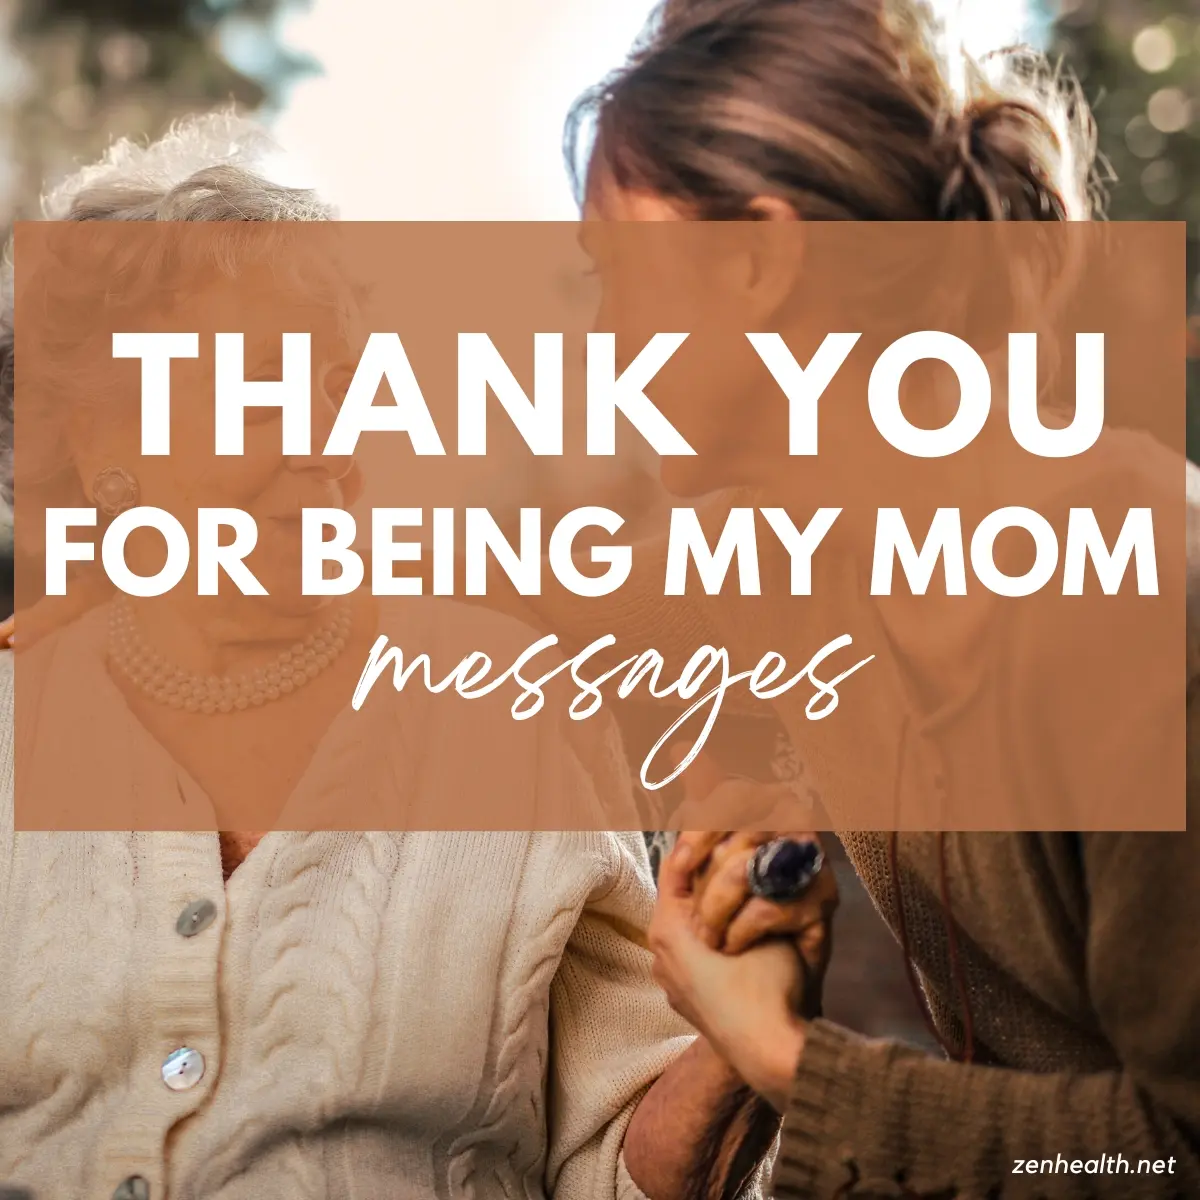 thank you for being my mom messages text overlay on a photo of a mother and daughter holding hands